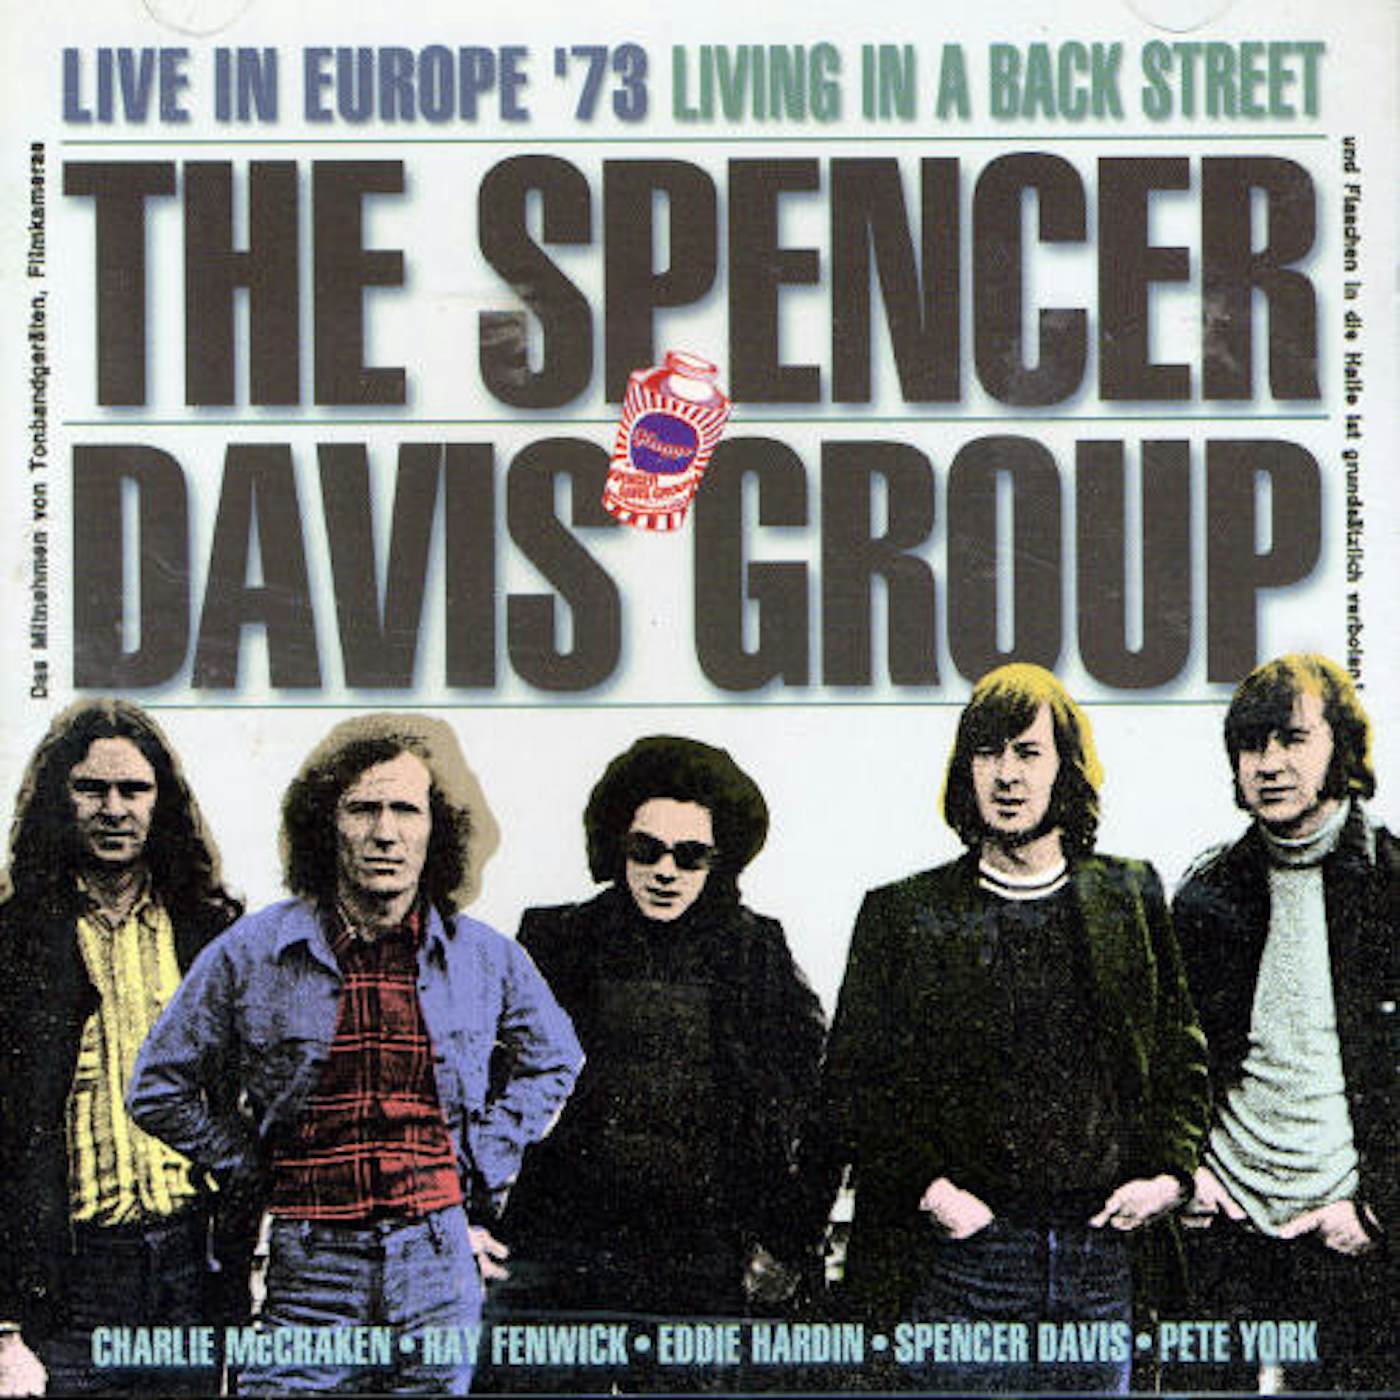 The Spencer Davis Group LIVE IN EUROPE CD